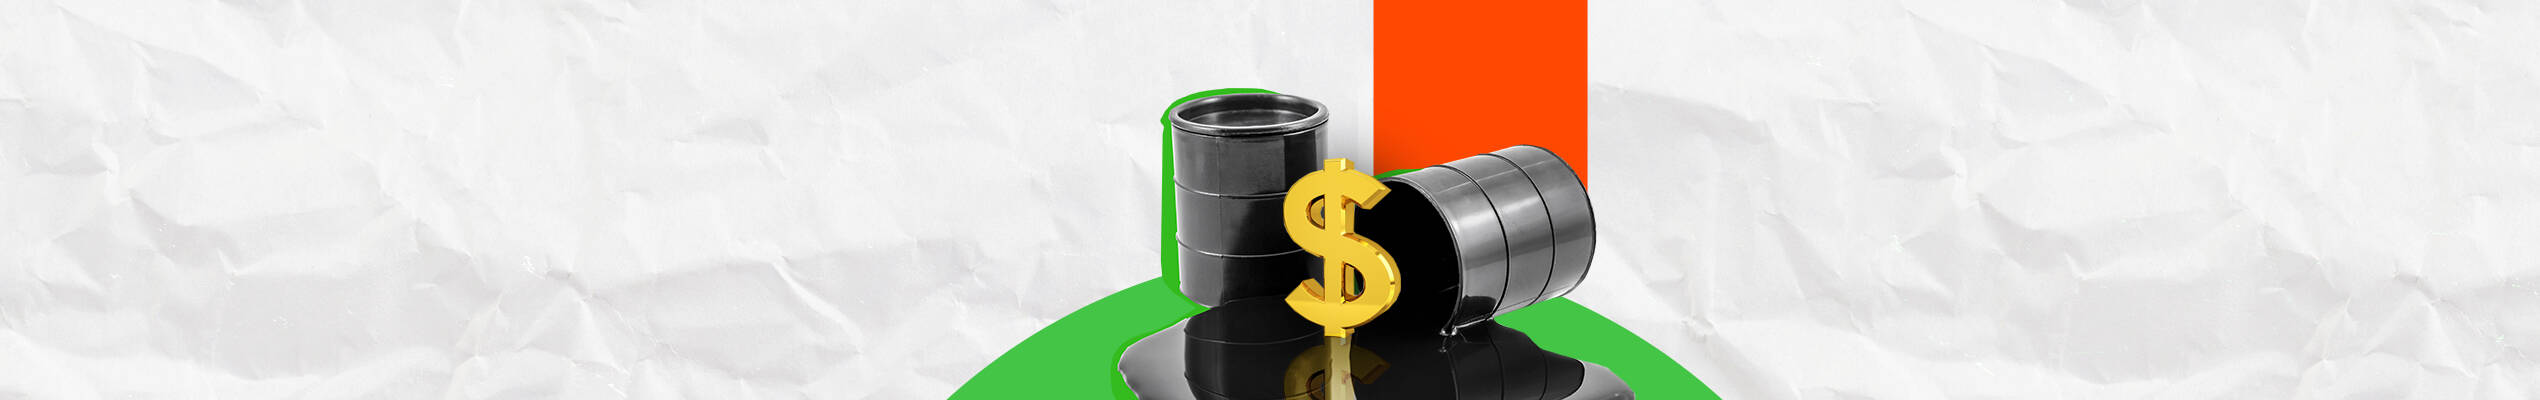 Brent: How to Trade OPEC Meeting